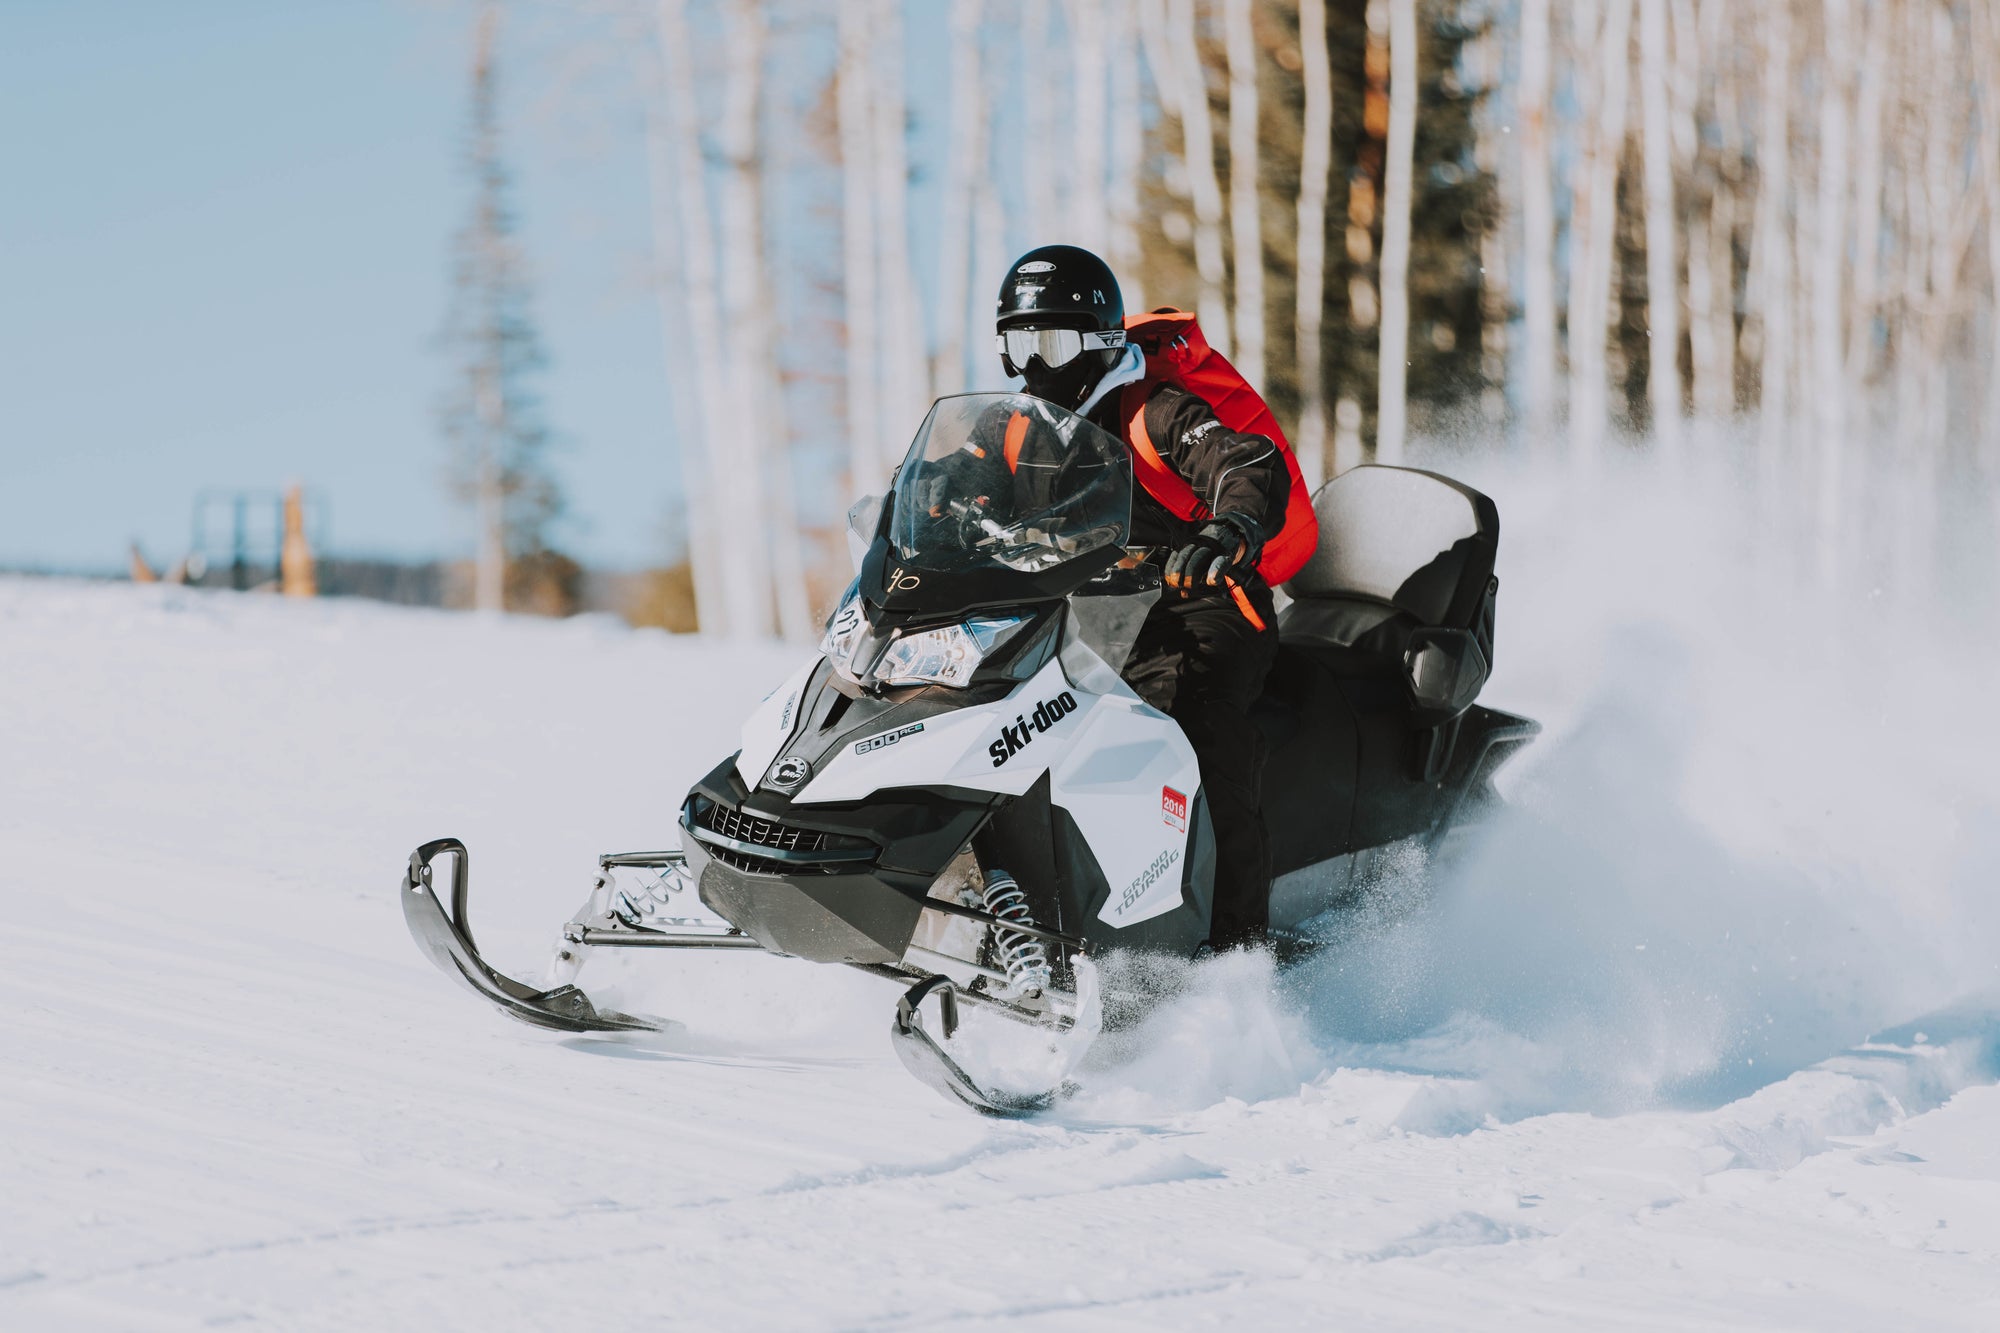 BRP Announces Production of Electric Snowmobiles for 2024 Lineup